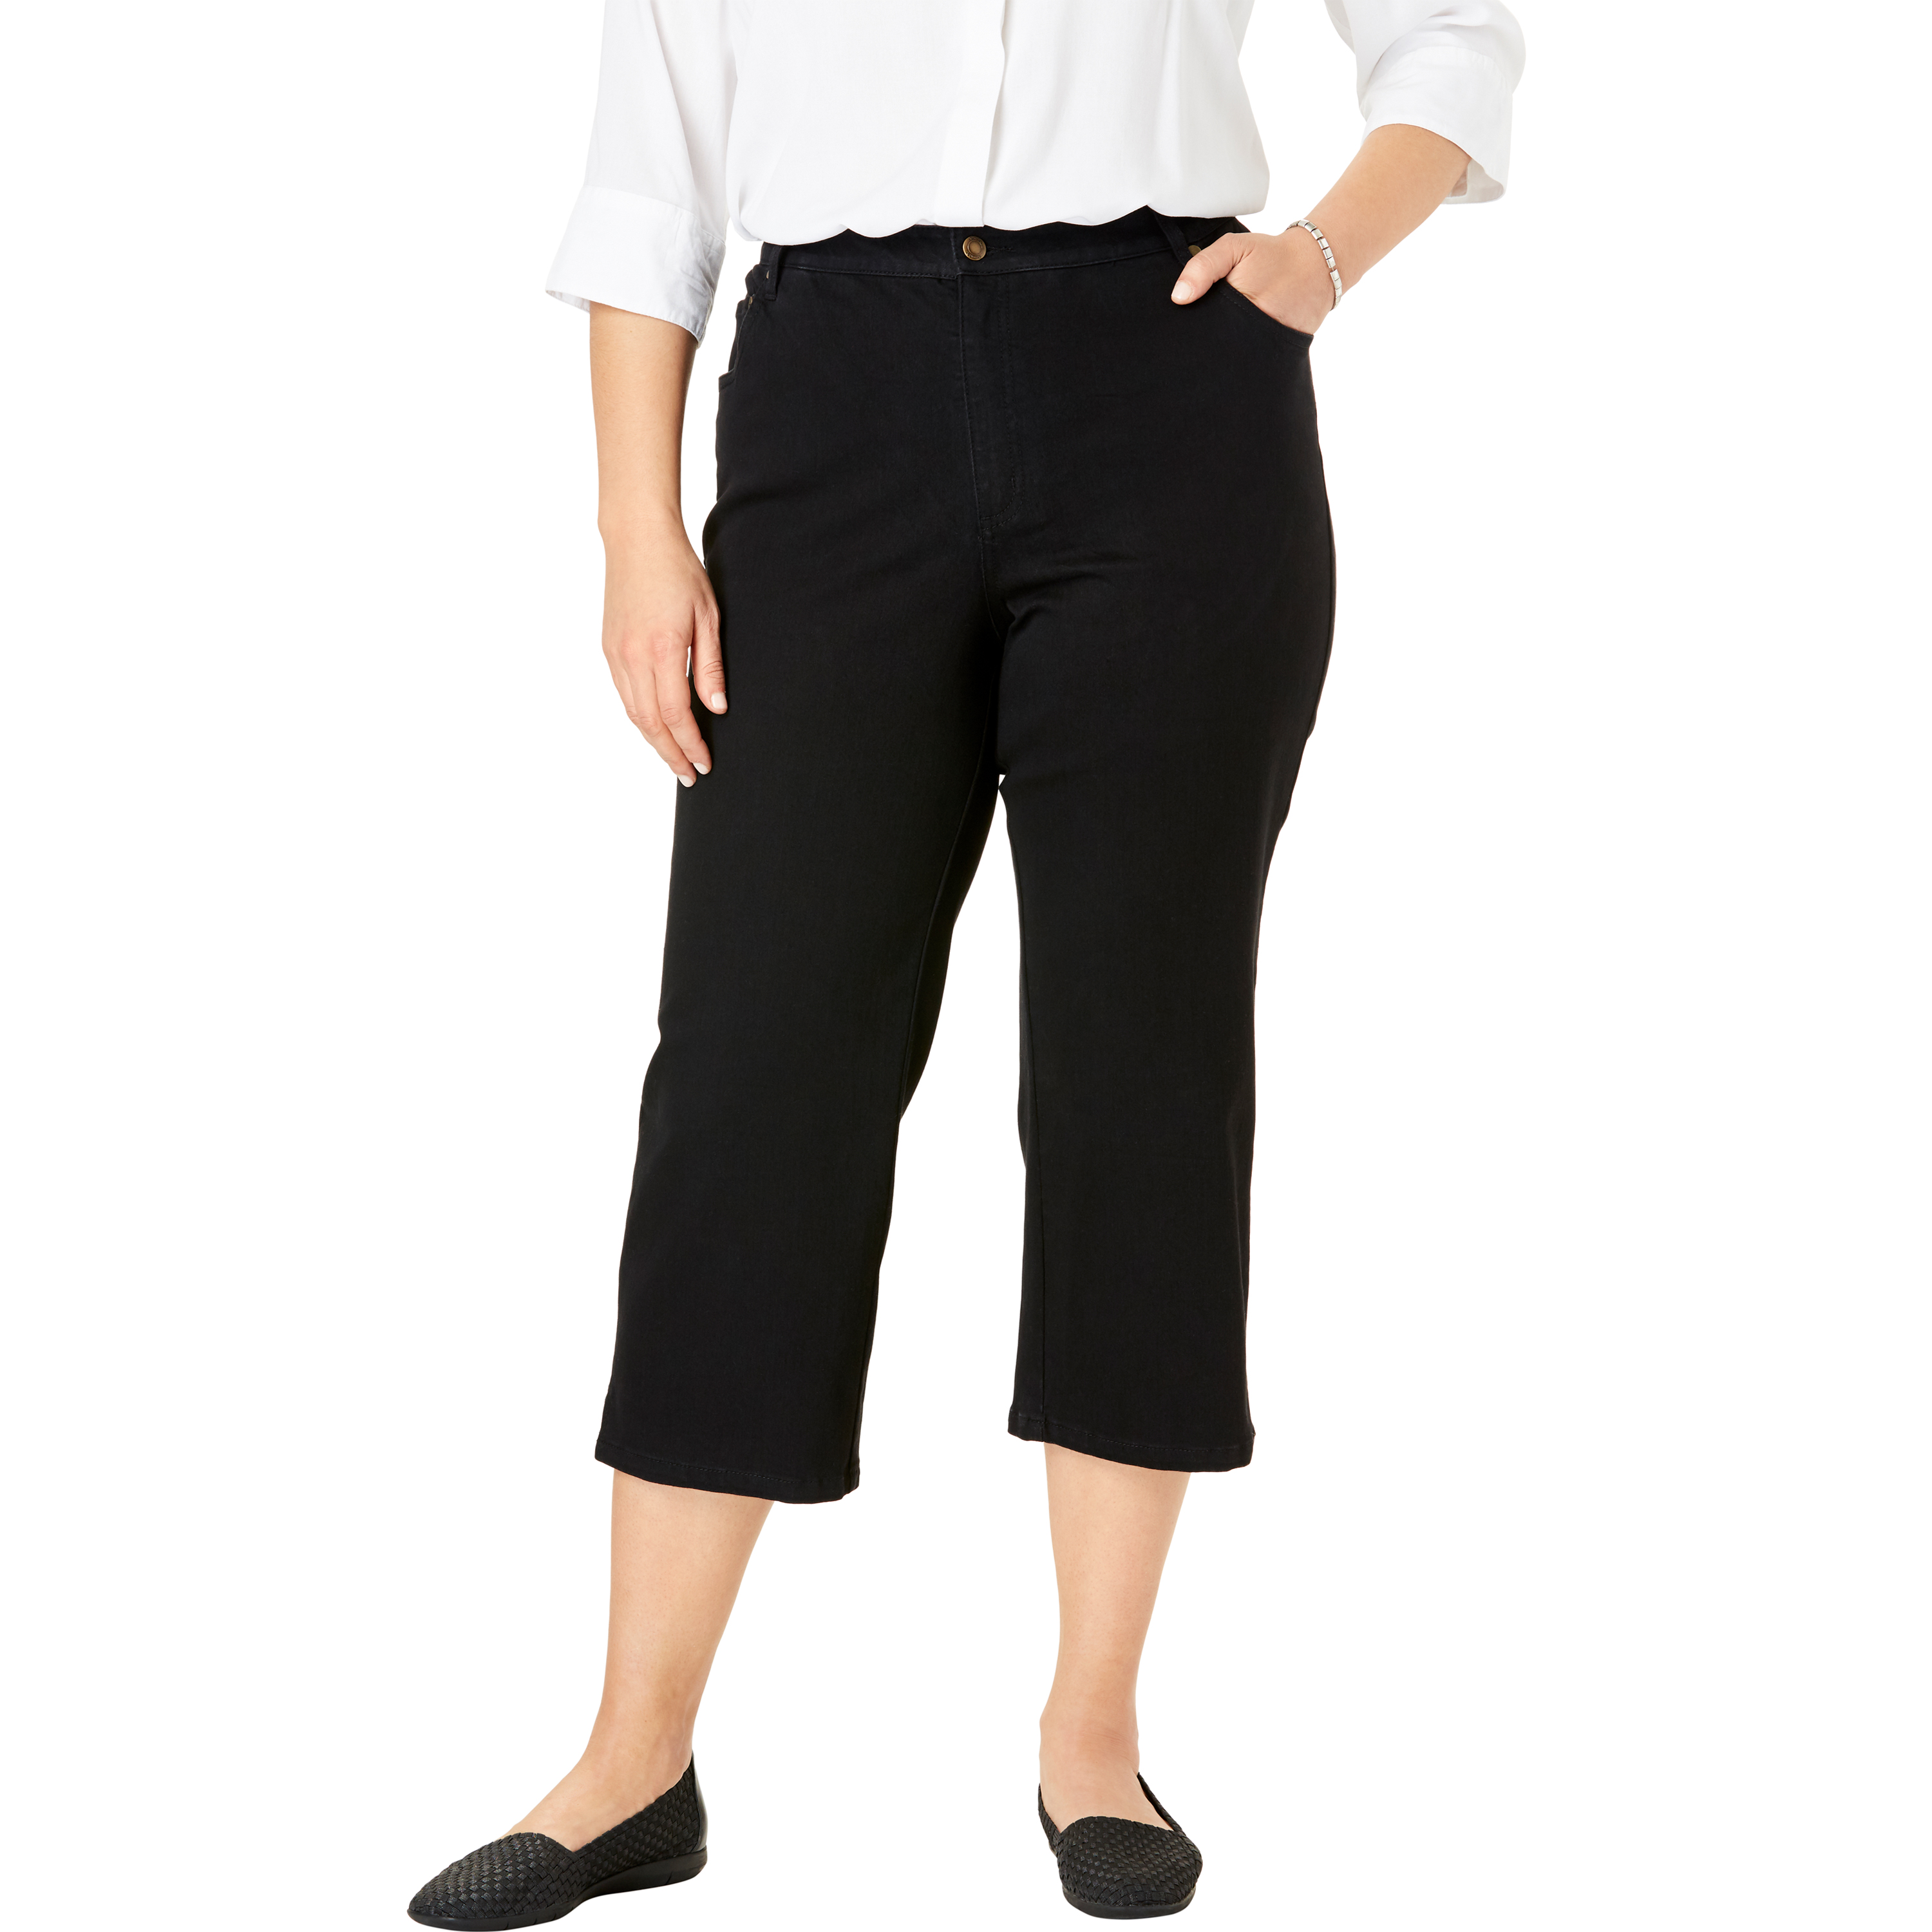 Woman Within Plus Size Capri Stretch Jean Jeans - image 1 of 4